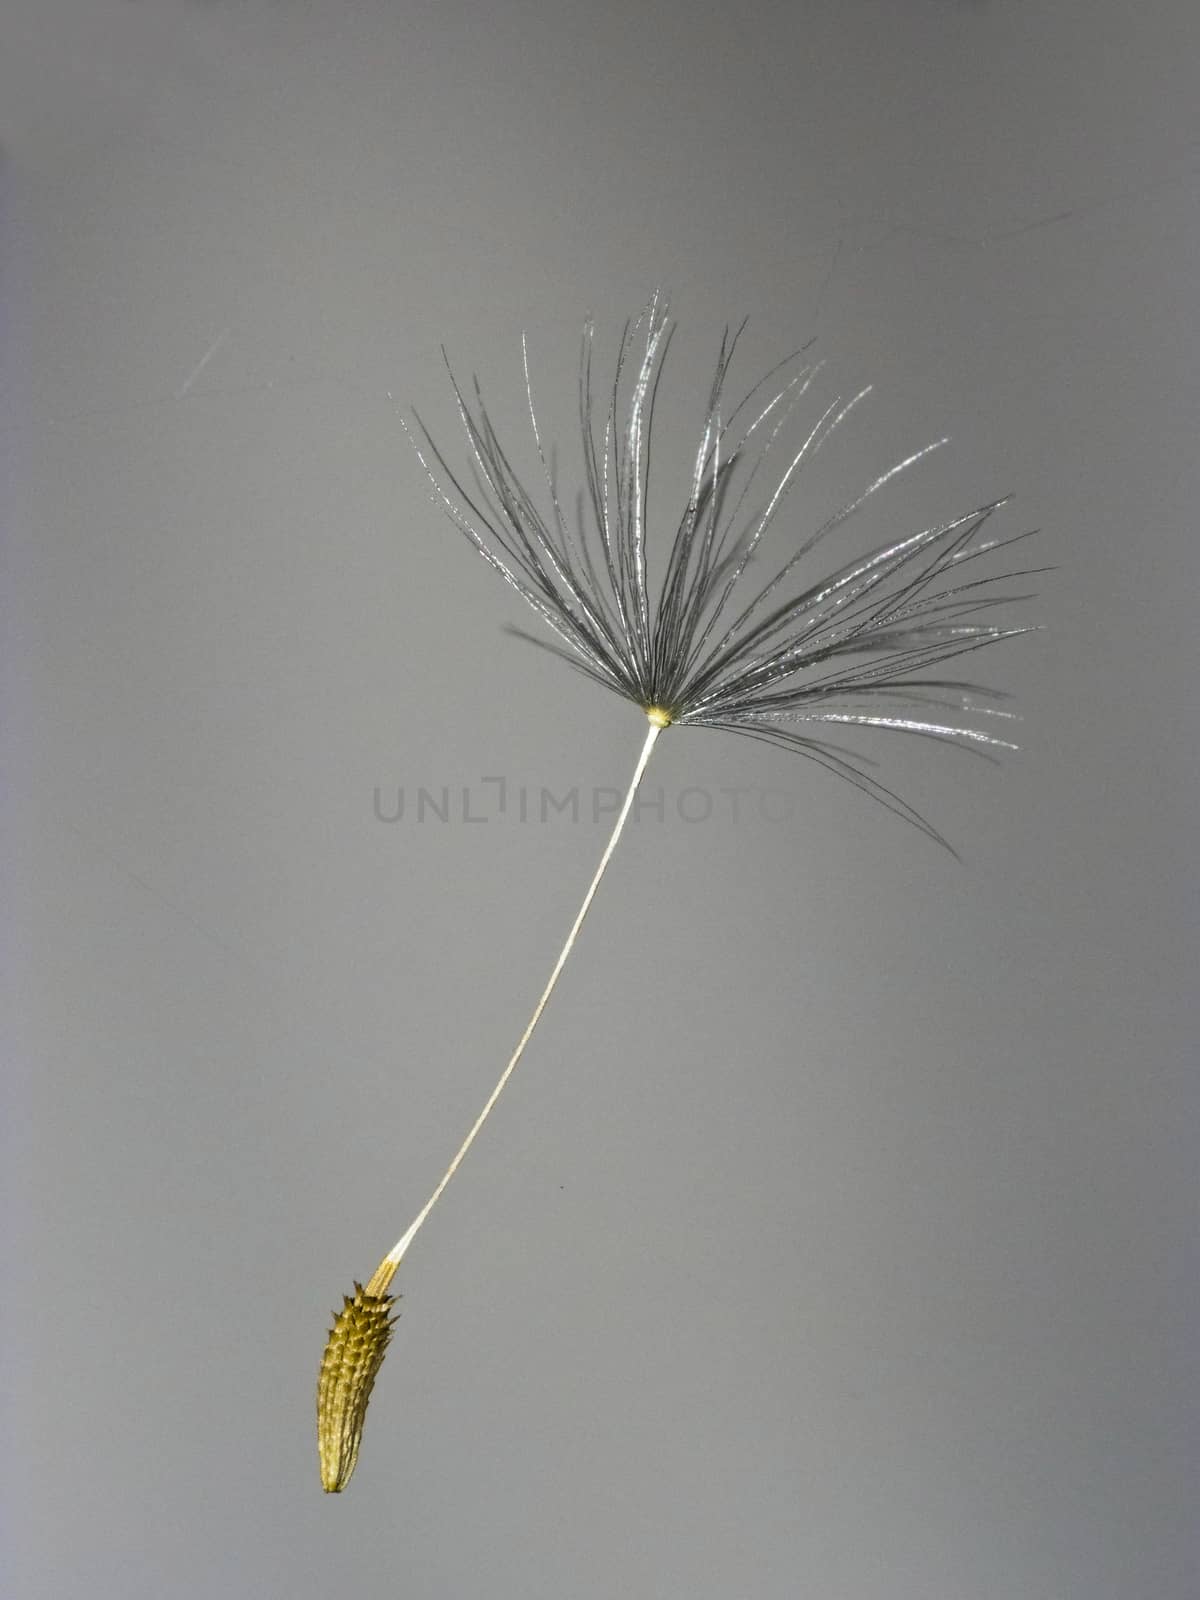 Single dandelion seed hovering in the air

